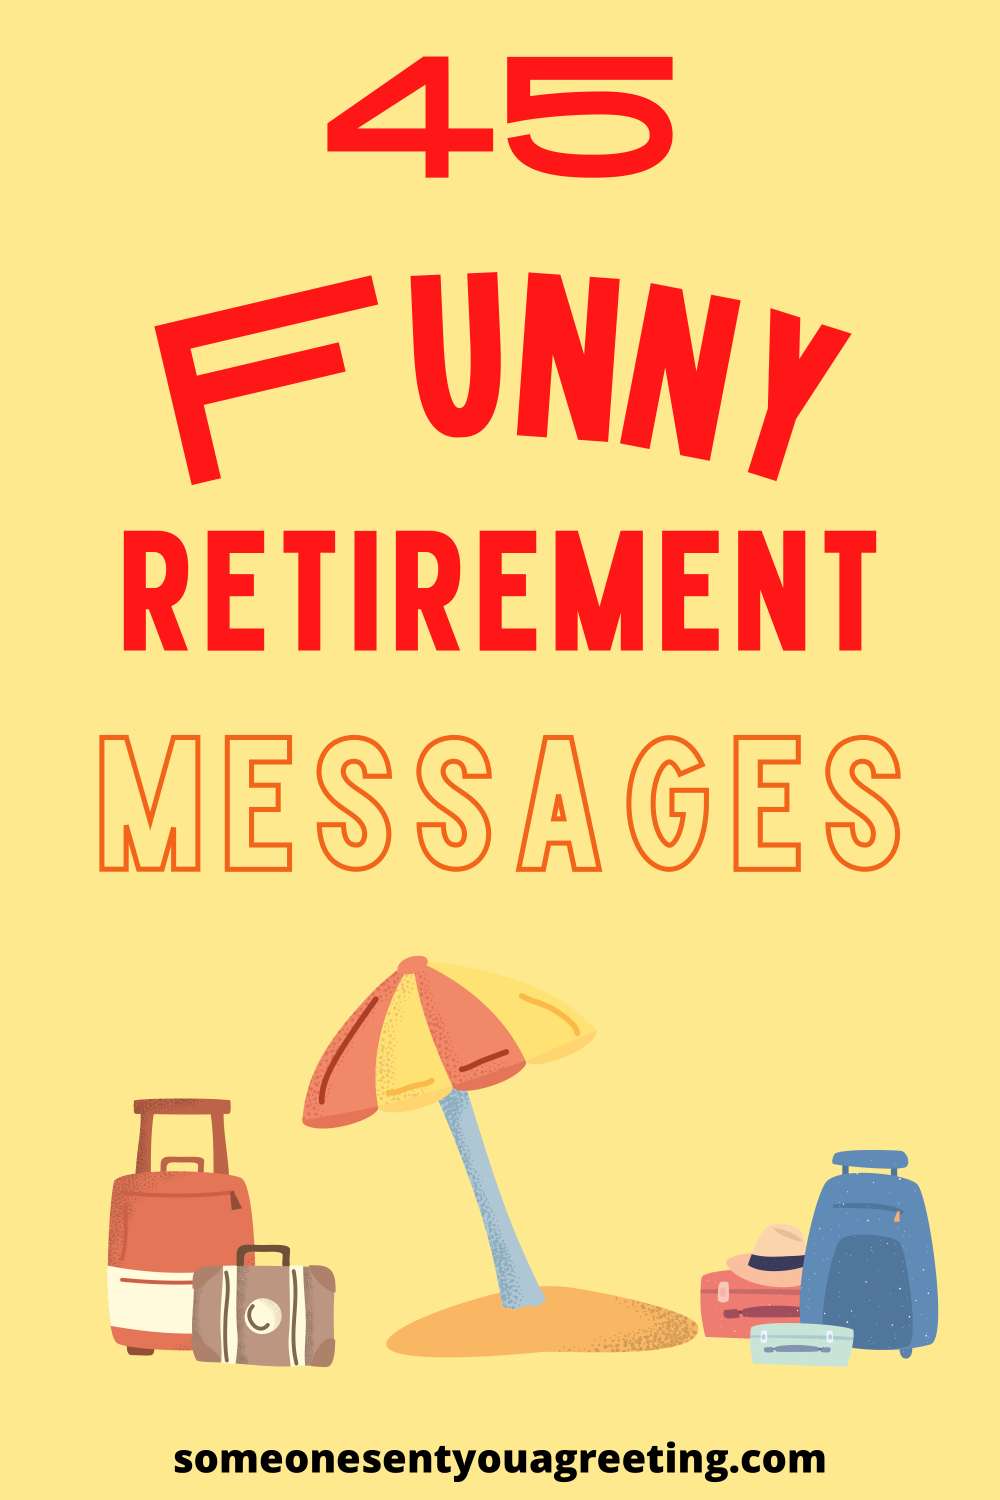 45 Funny Retirement Messages and Quotes - Someone Sent You A Greeting